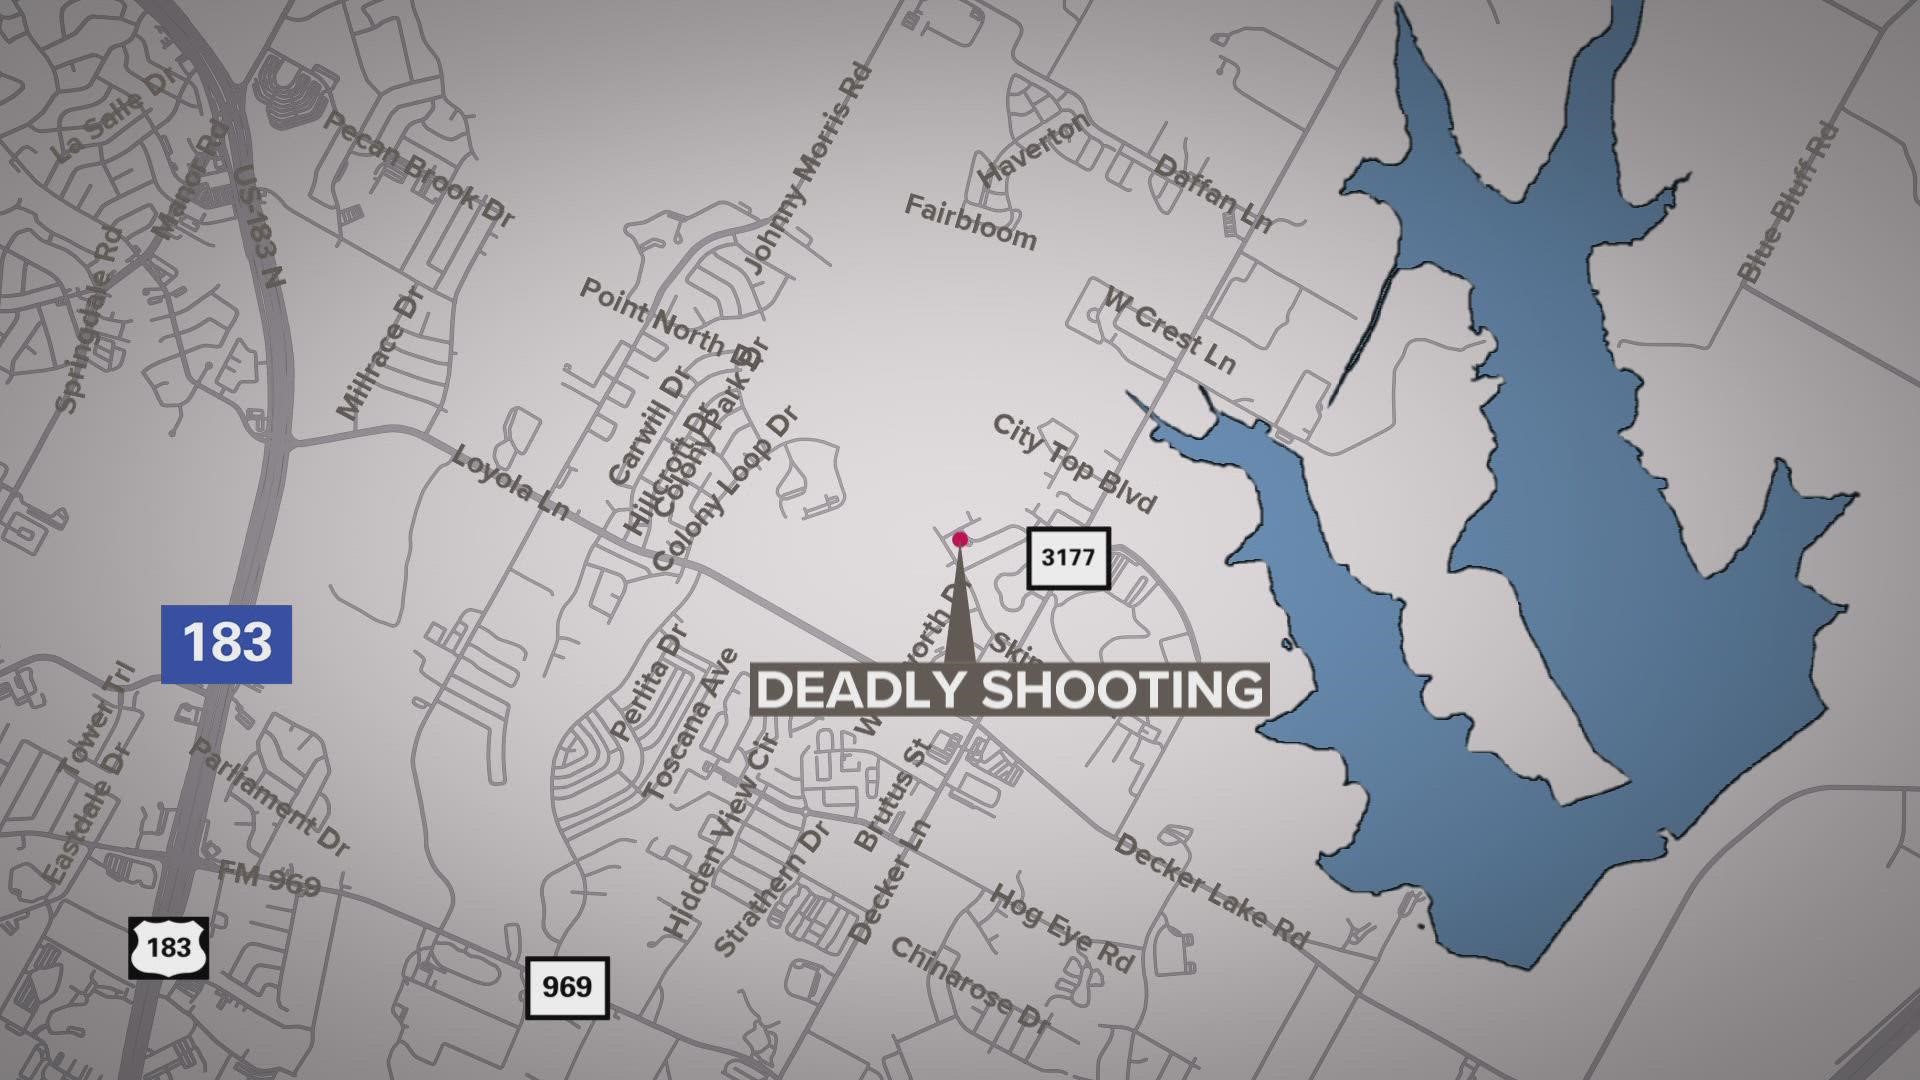 A shooting at 2 a.m. early Monday morning has resulted in one person dead. The death has not been ruled a homicide, but teams from APD are investigating.